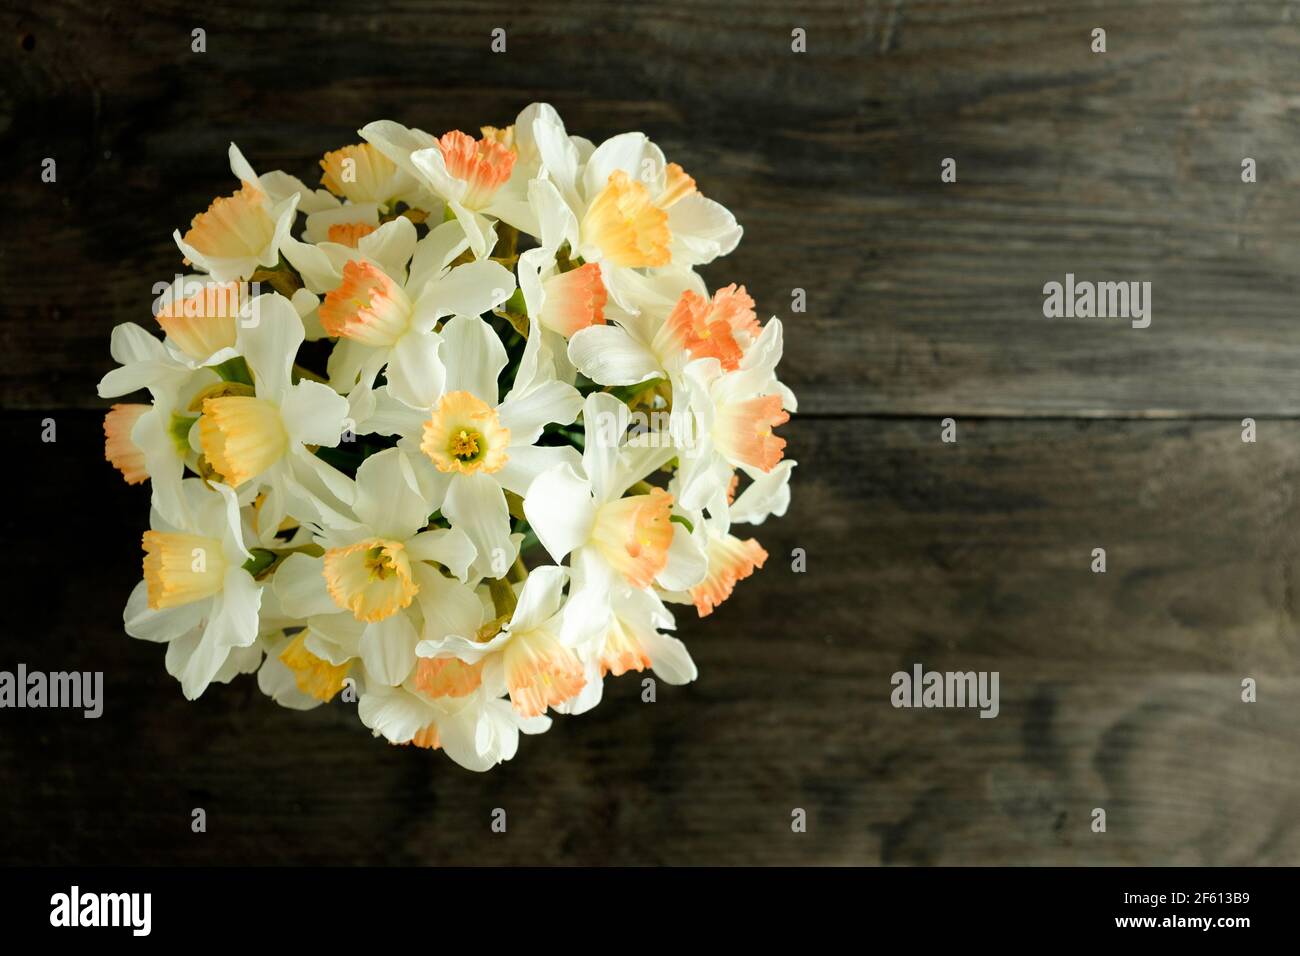 An overhead view of a bunch of yellow and orange daffodils to one side of a dark wooden table Stock Photo